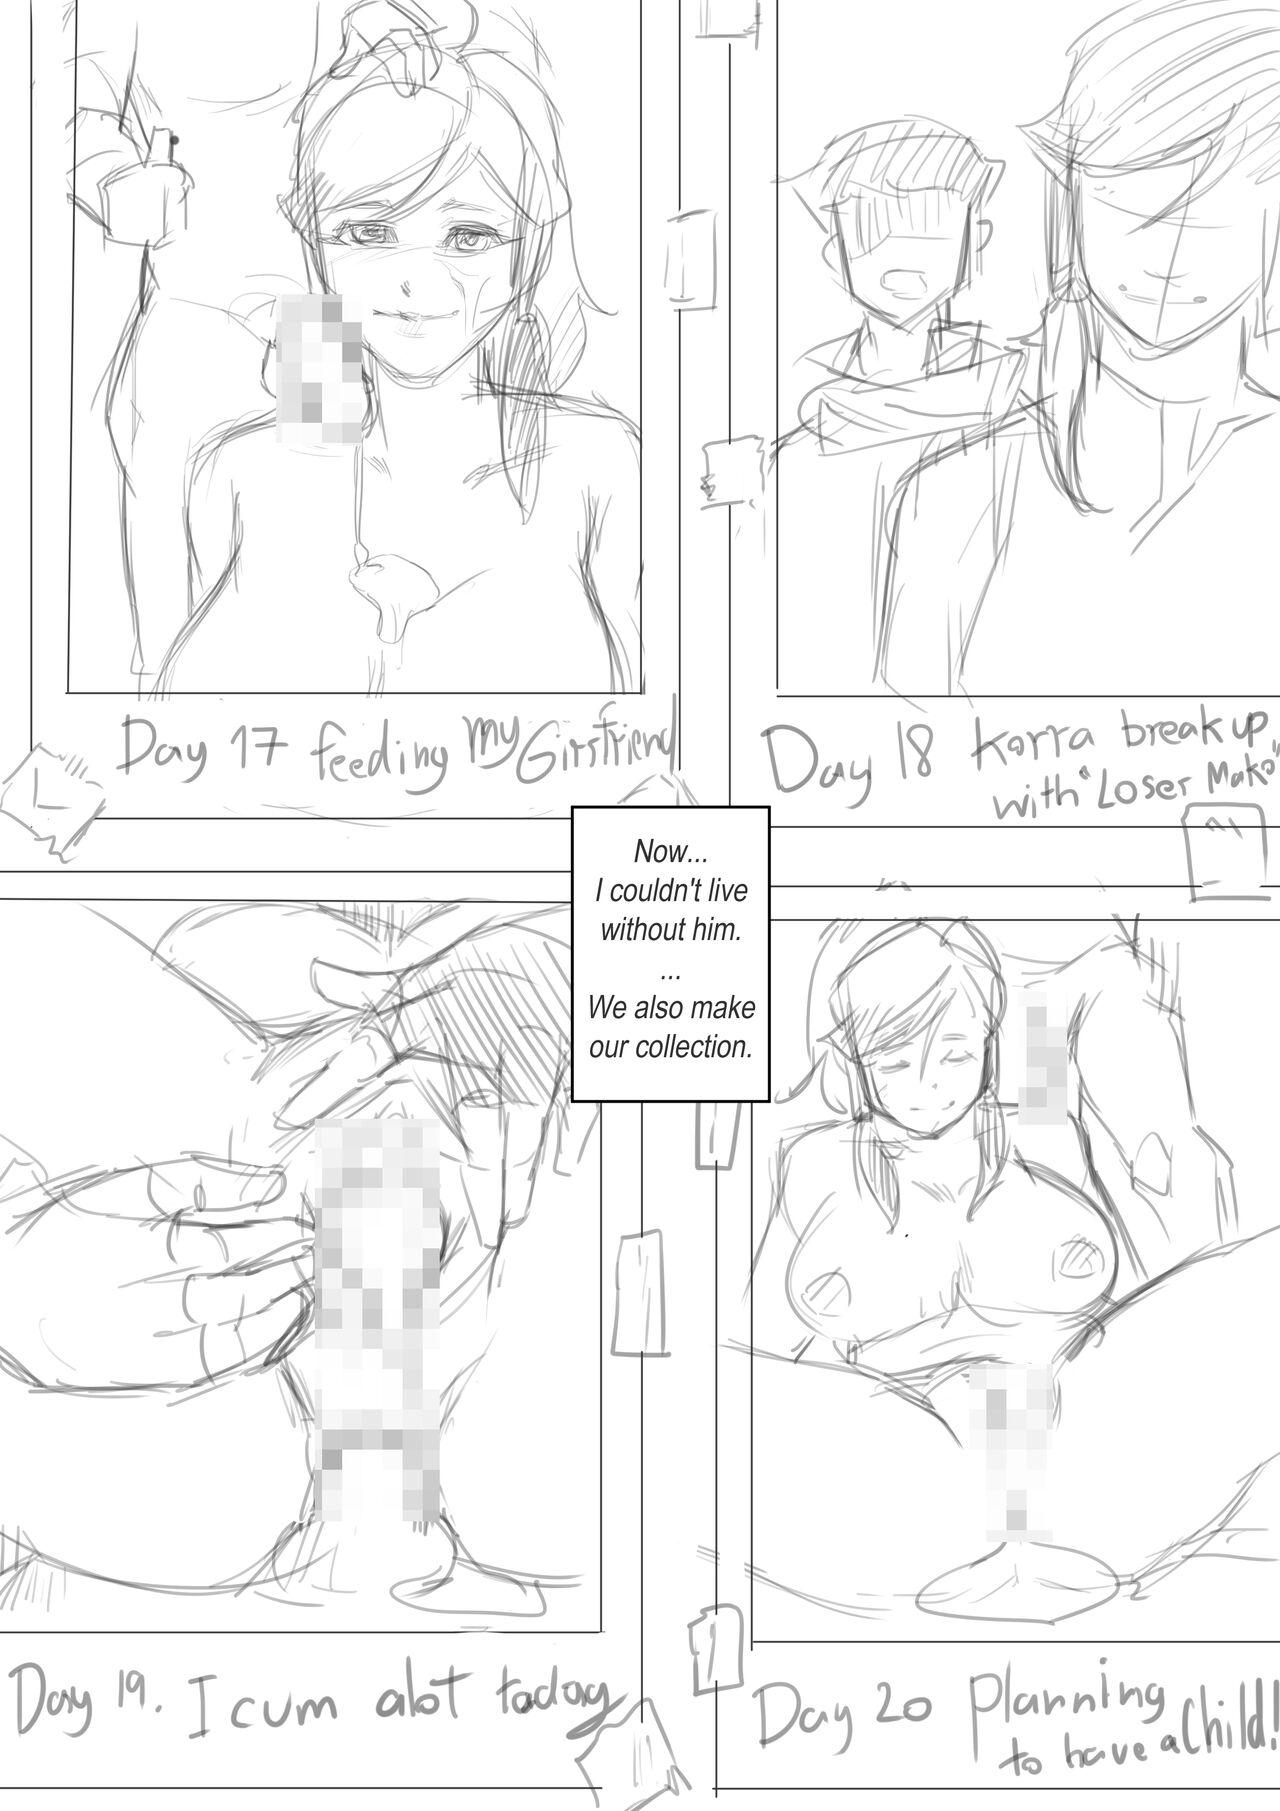 Latino Avatar doujin sketch - The legend of korra Roleplay - Page 11